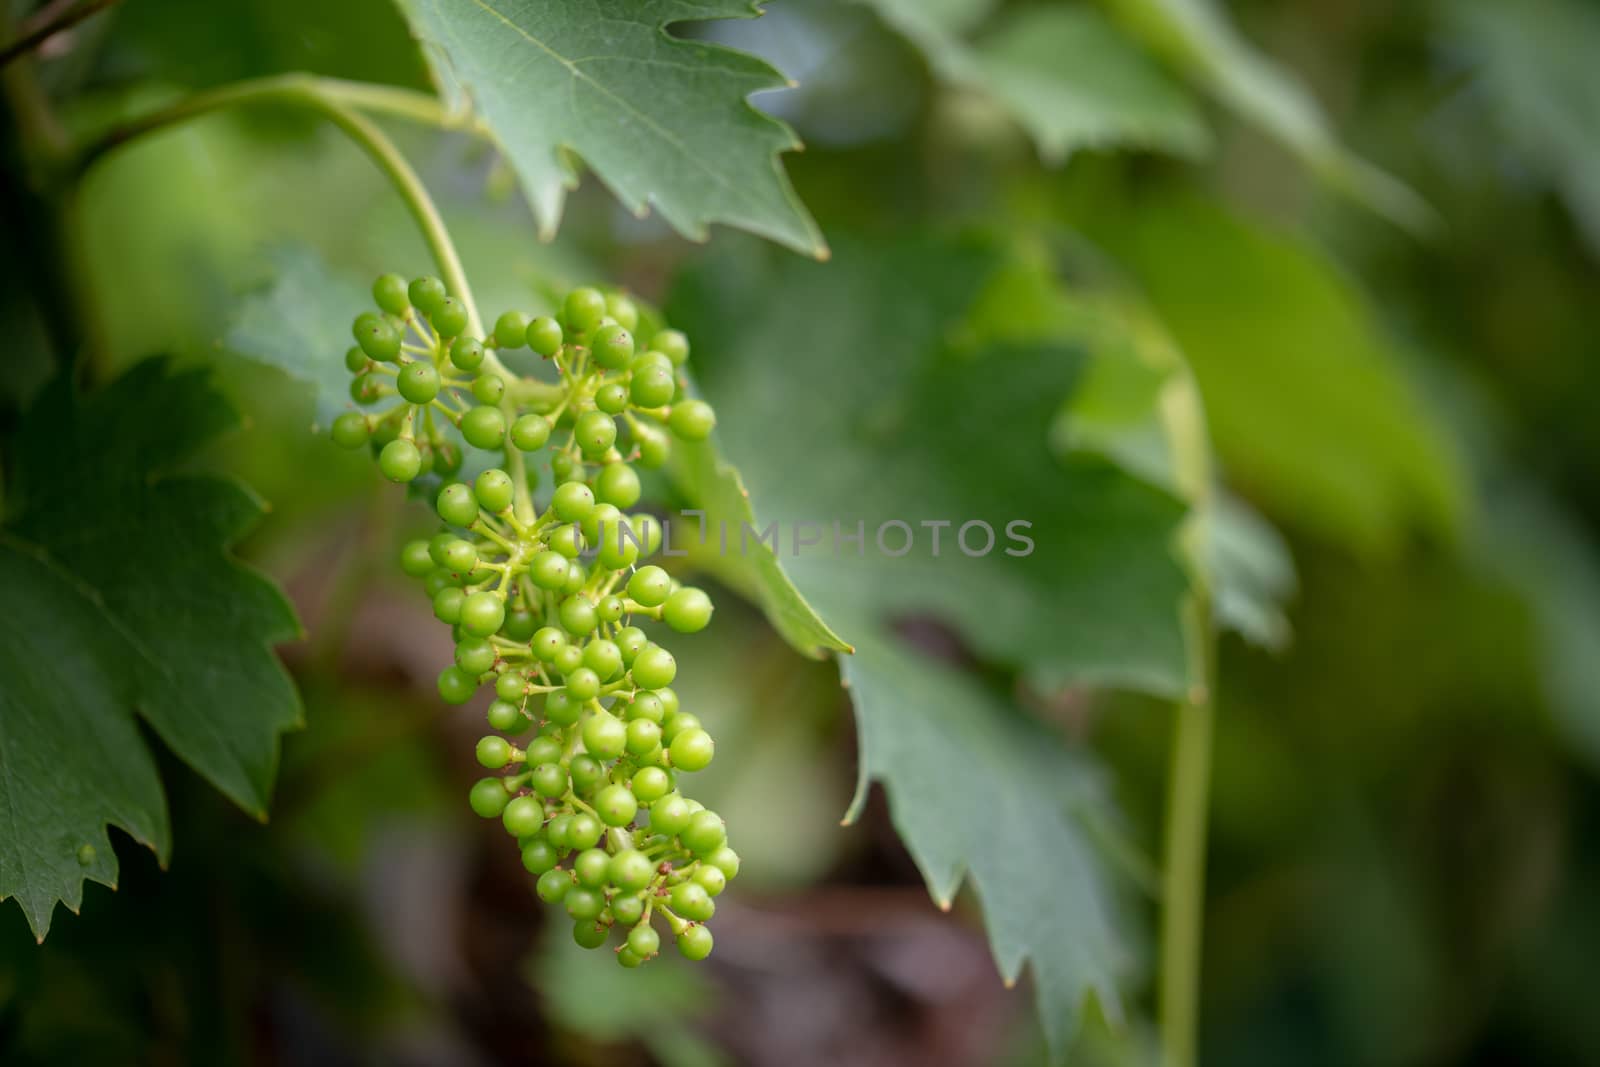 Green, unripe, young wine grapes in vineyard, early summer, close-up, grapes growing on vines in vine yard, Europe